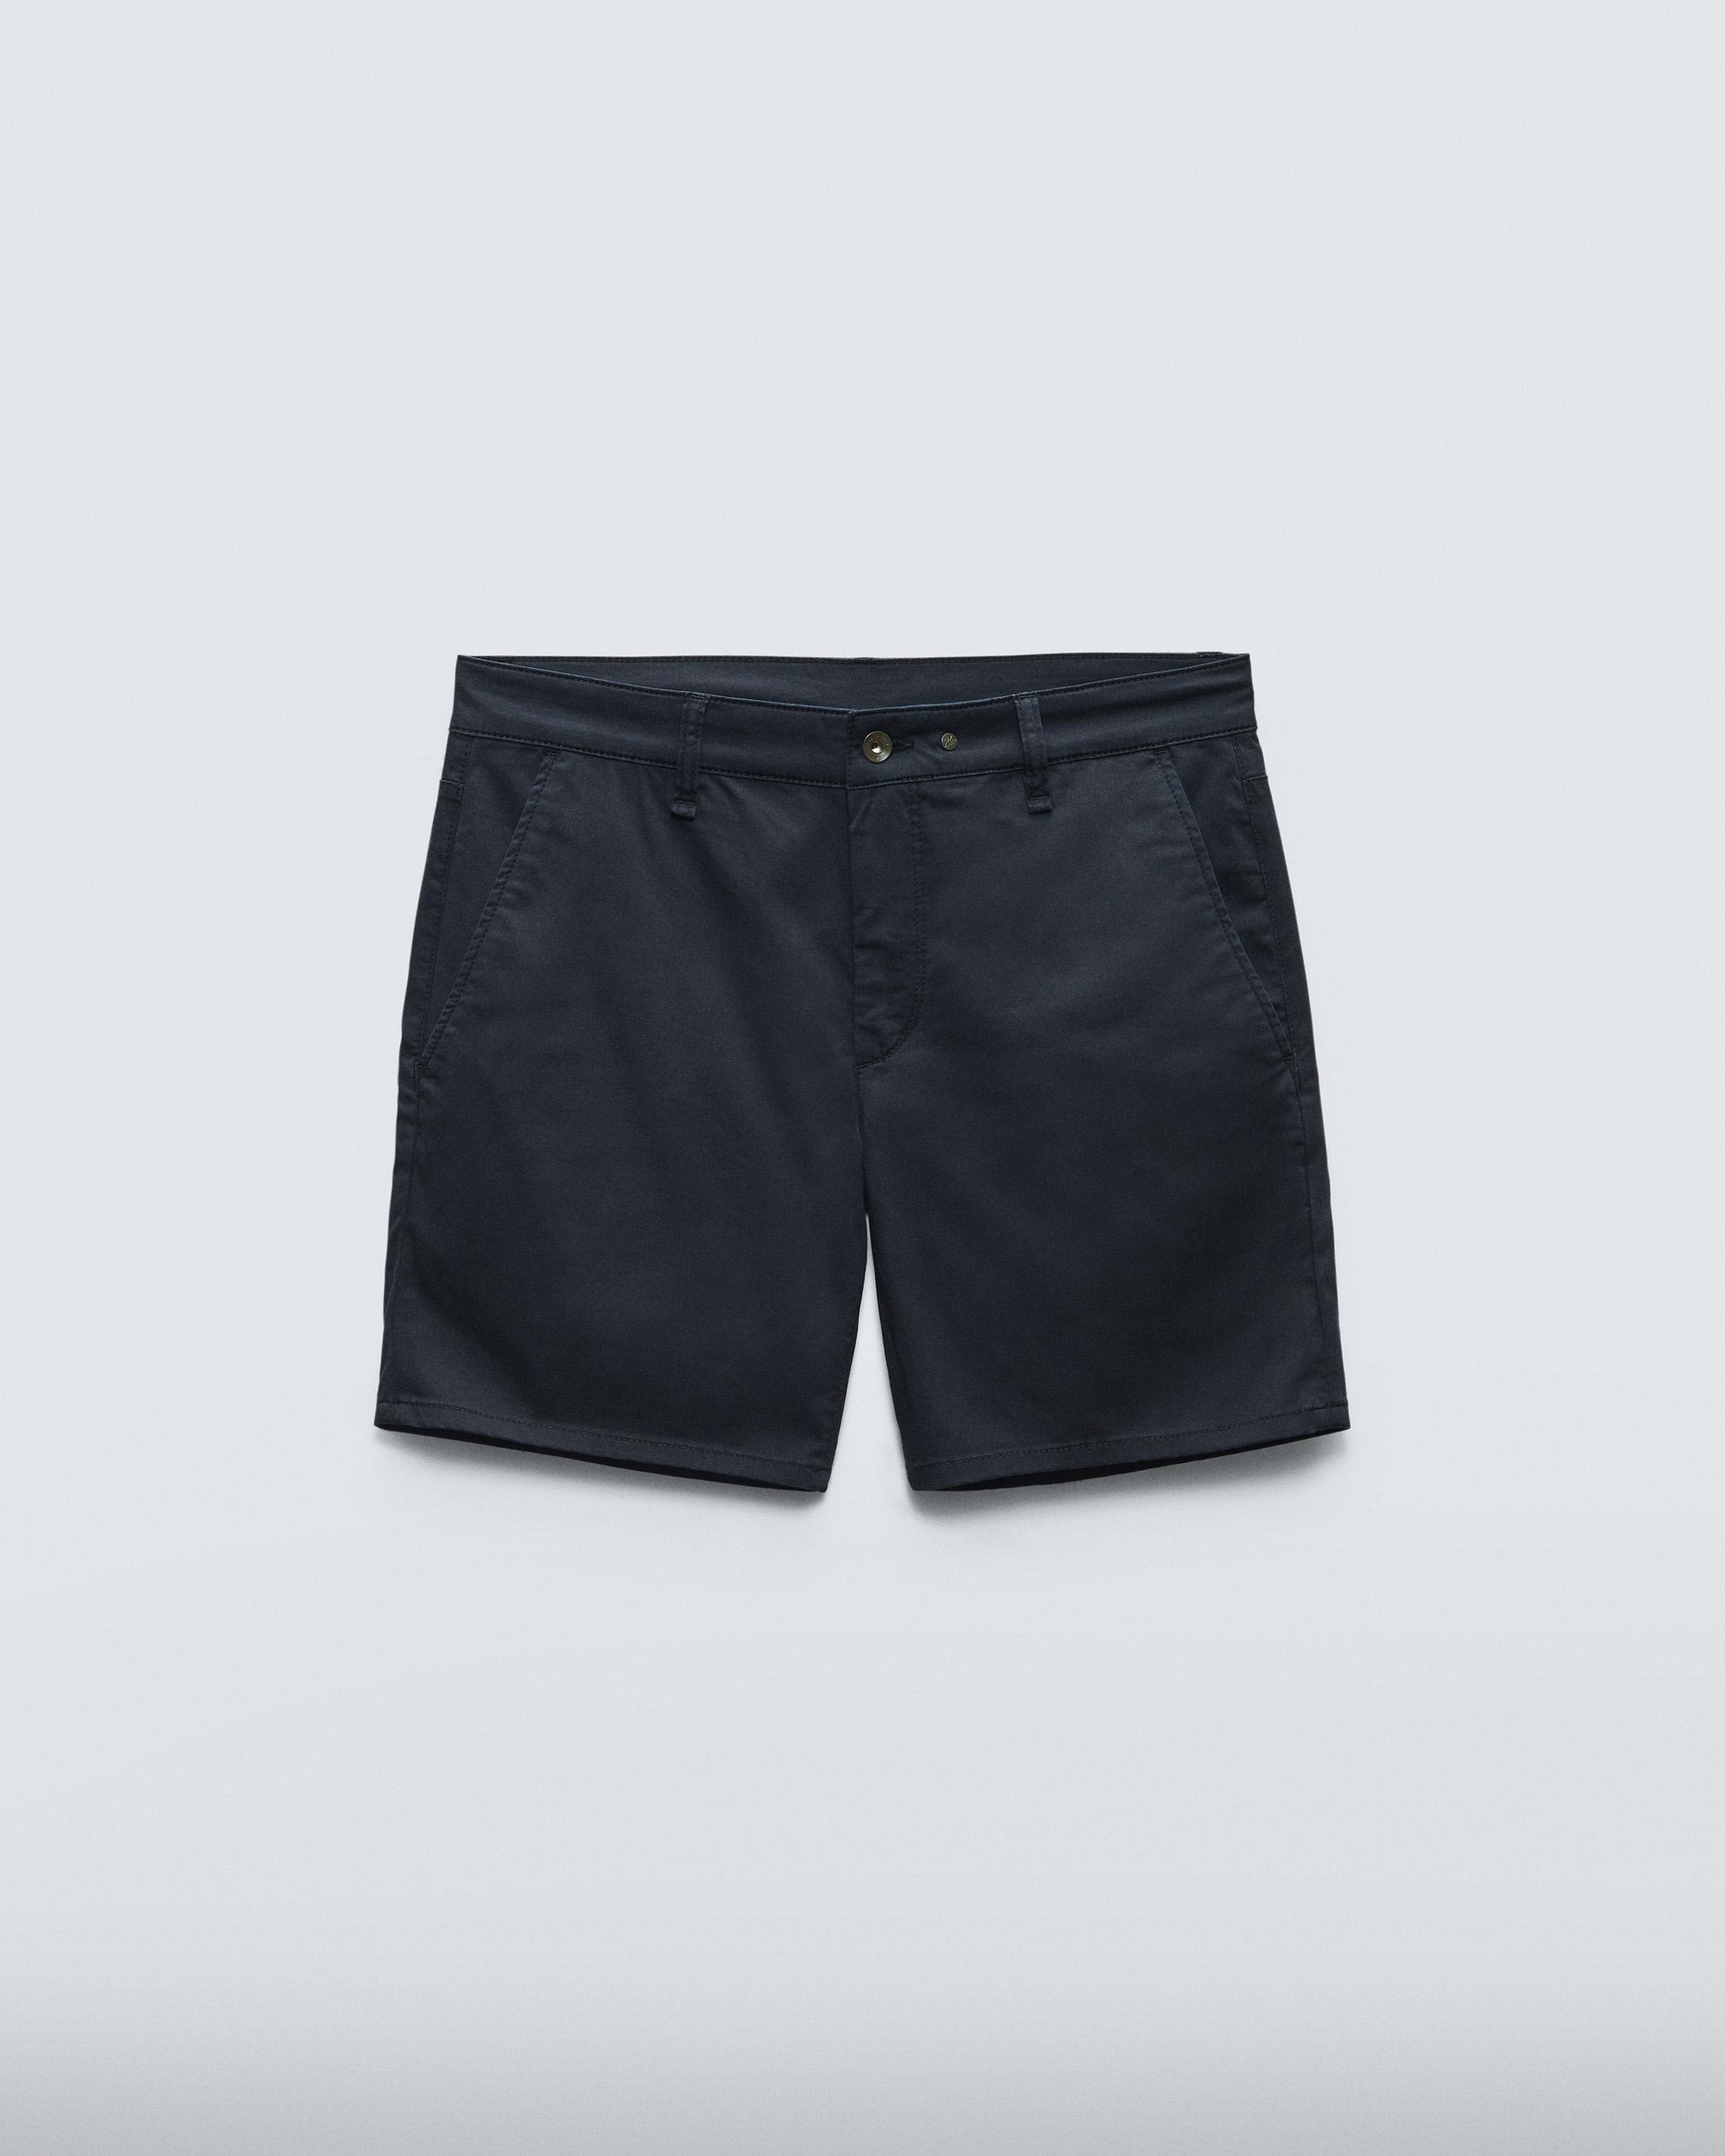 Standard Cotton Chino Short
Classic Fit - 1